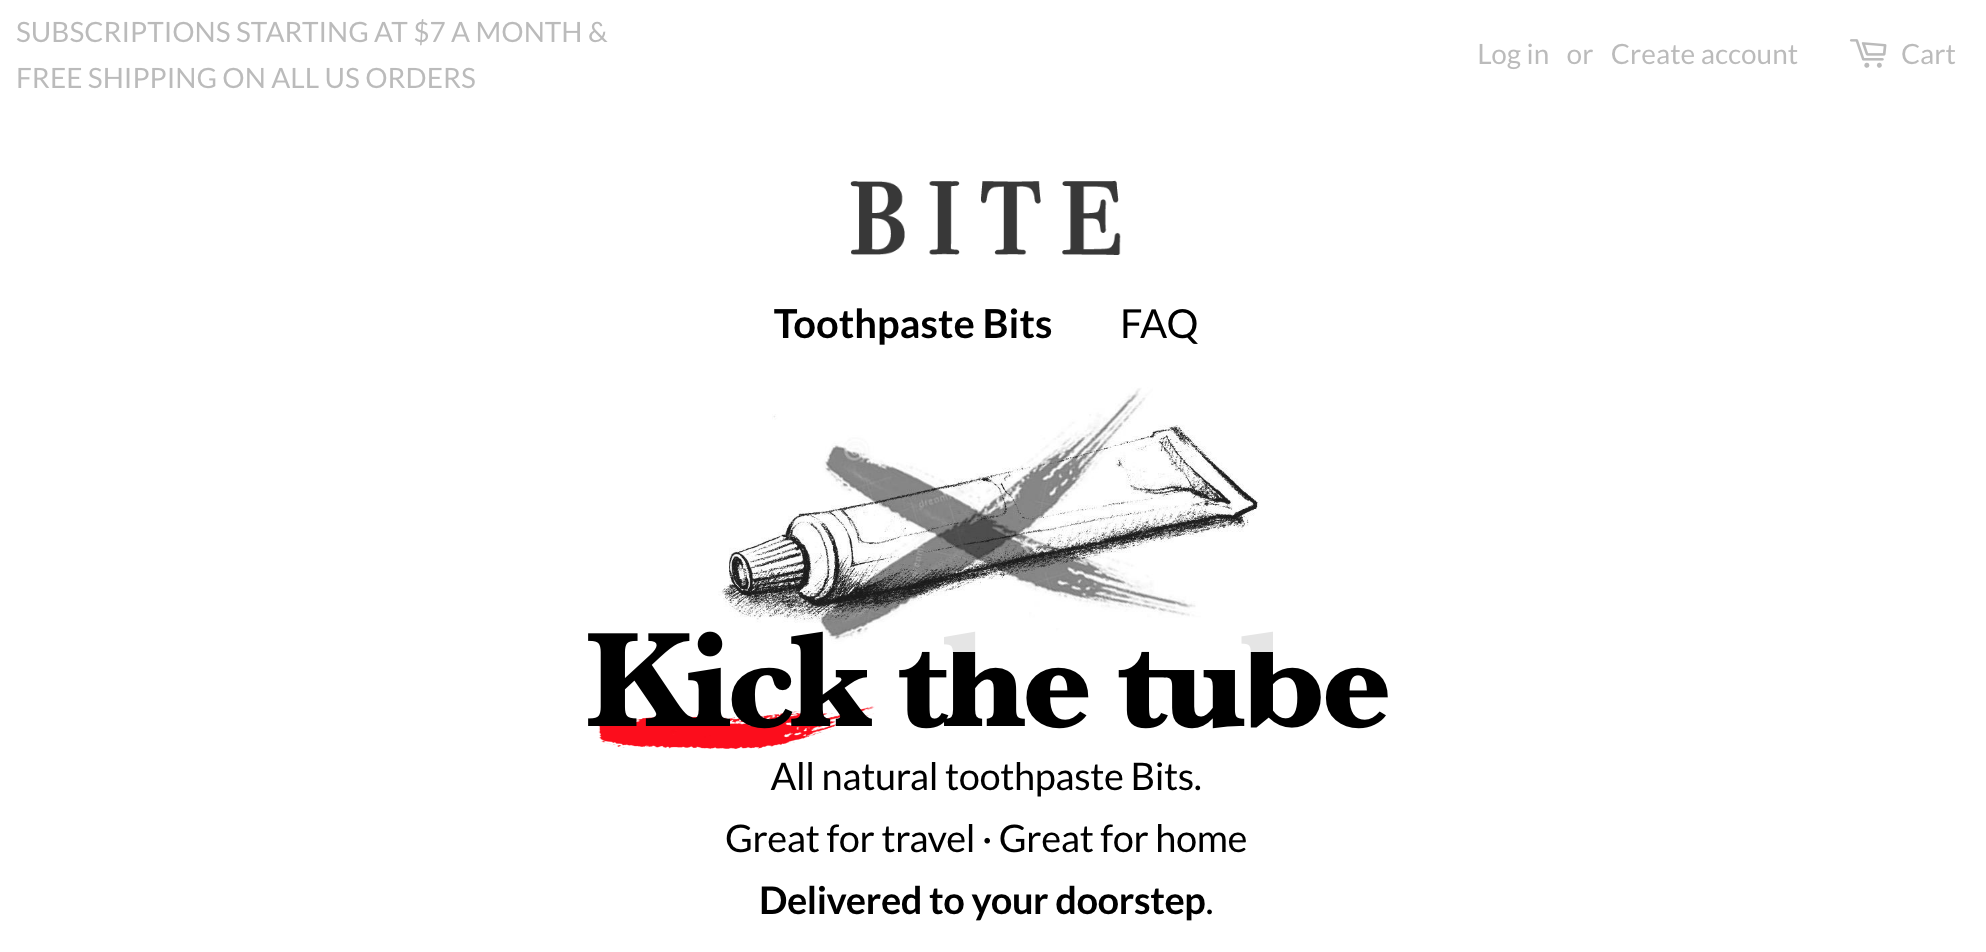 Screenshot showing a page on Bite